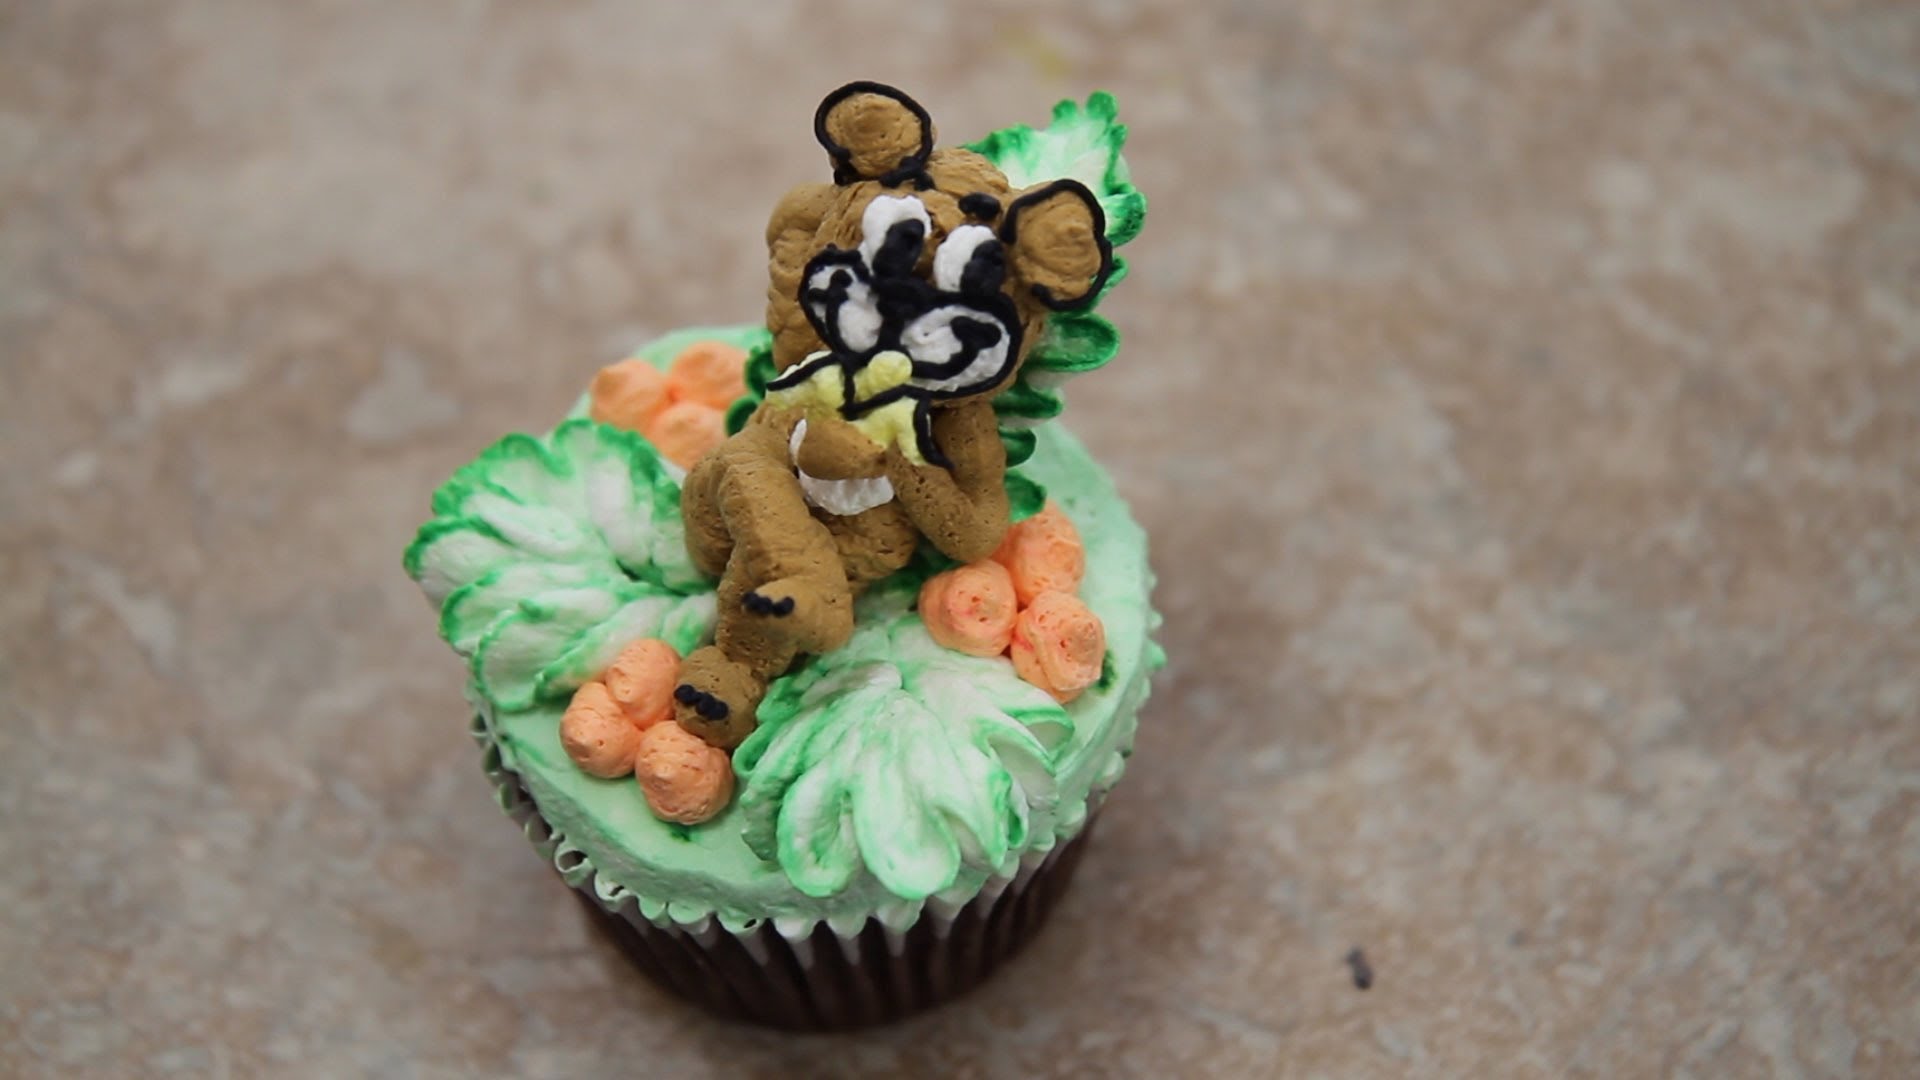 How to Decorate Monkey Cupcakes